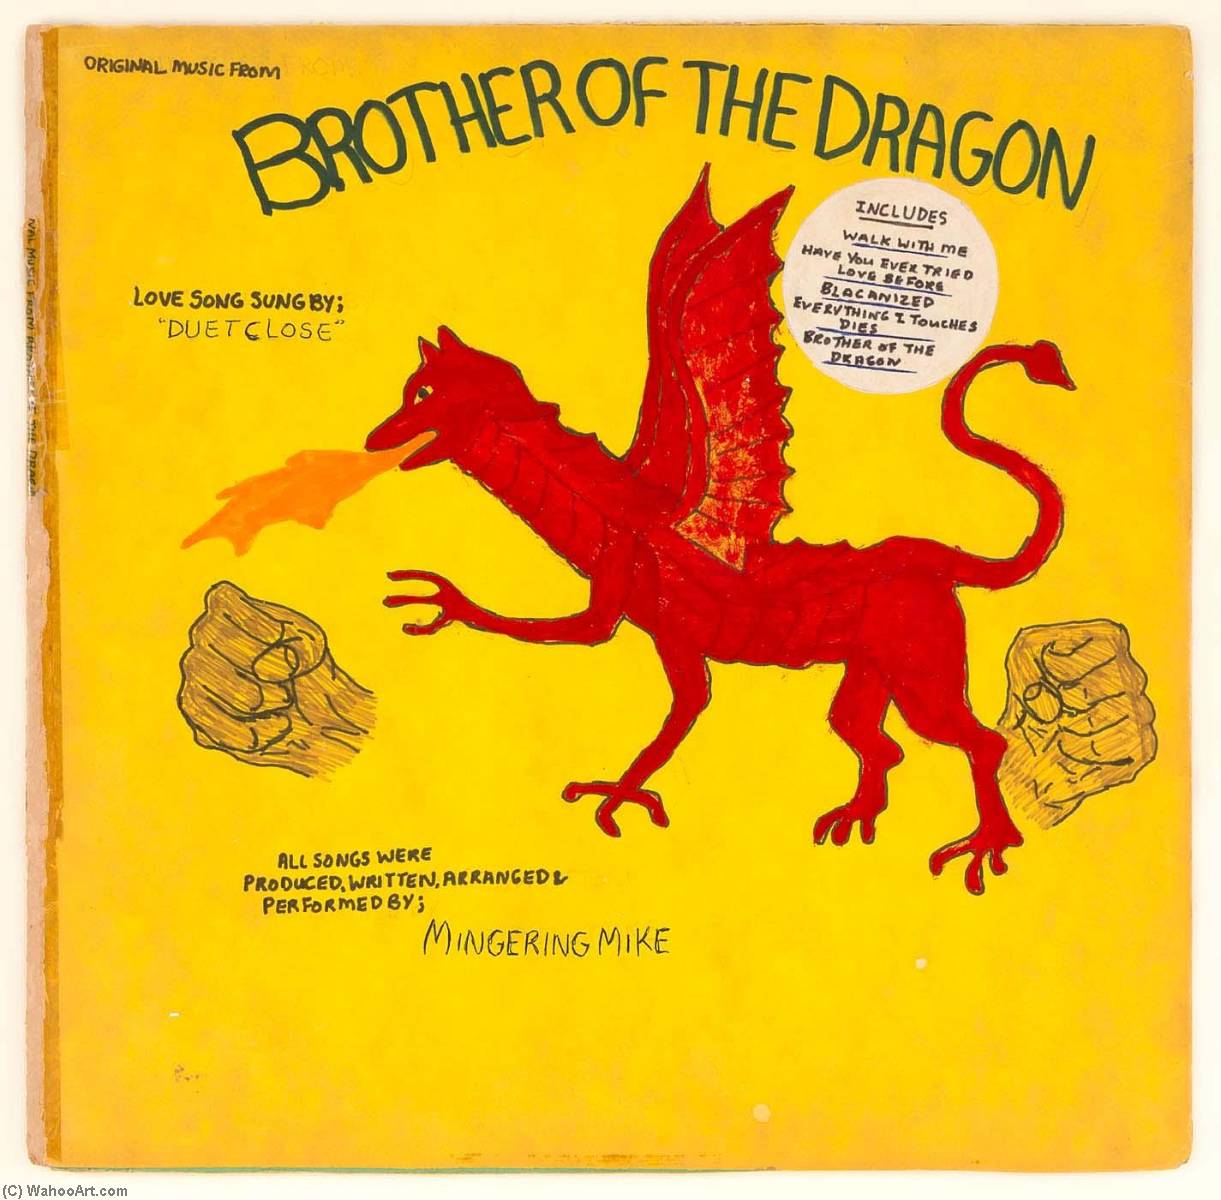 WikiOO.org - Encyclopedia of Fine Arts - Lukisan, Artwork Mingering Mike - ORIGINAL MUSIC FROM BROTHER OF THE DRAGON